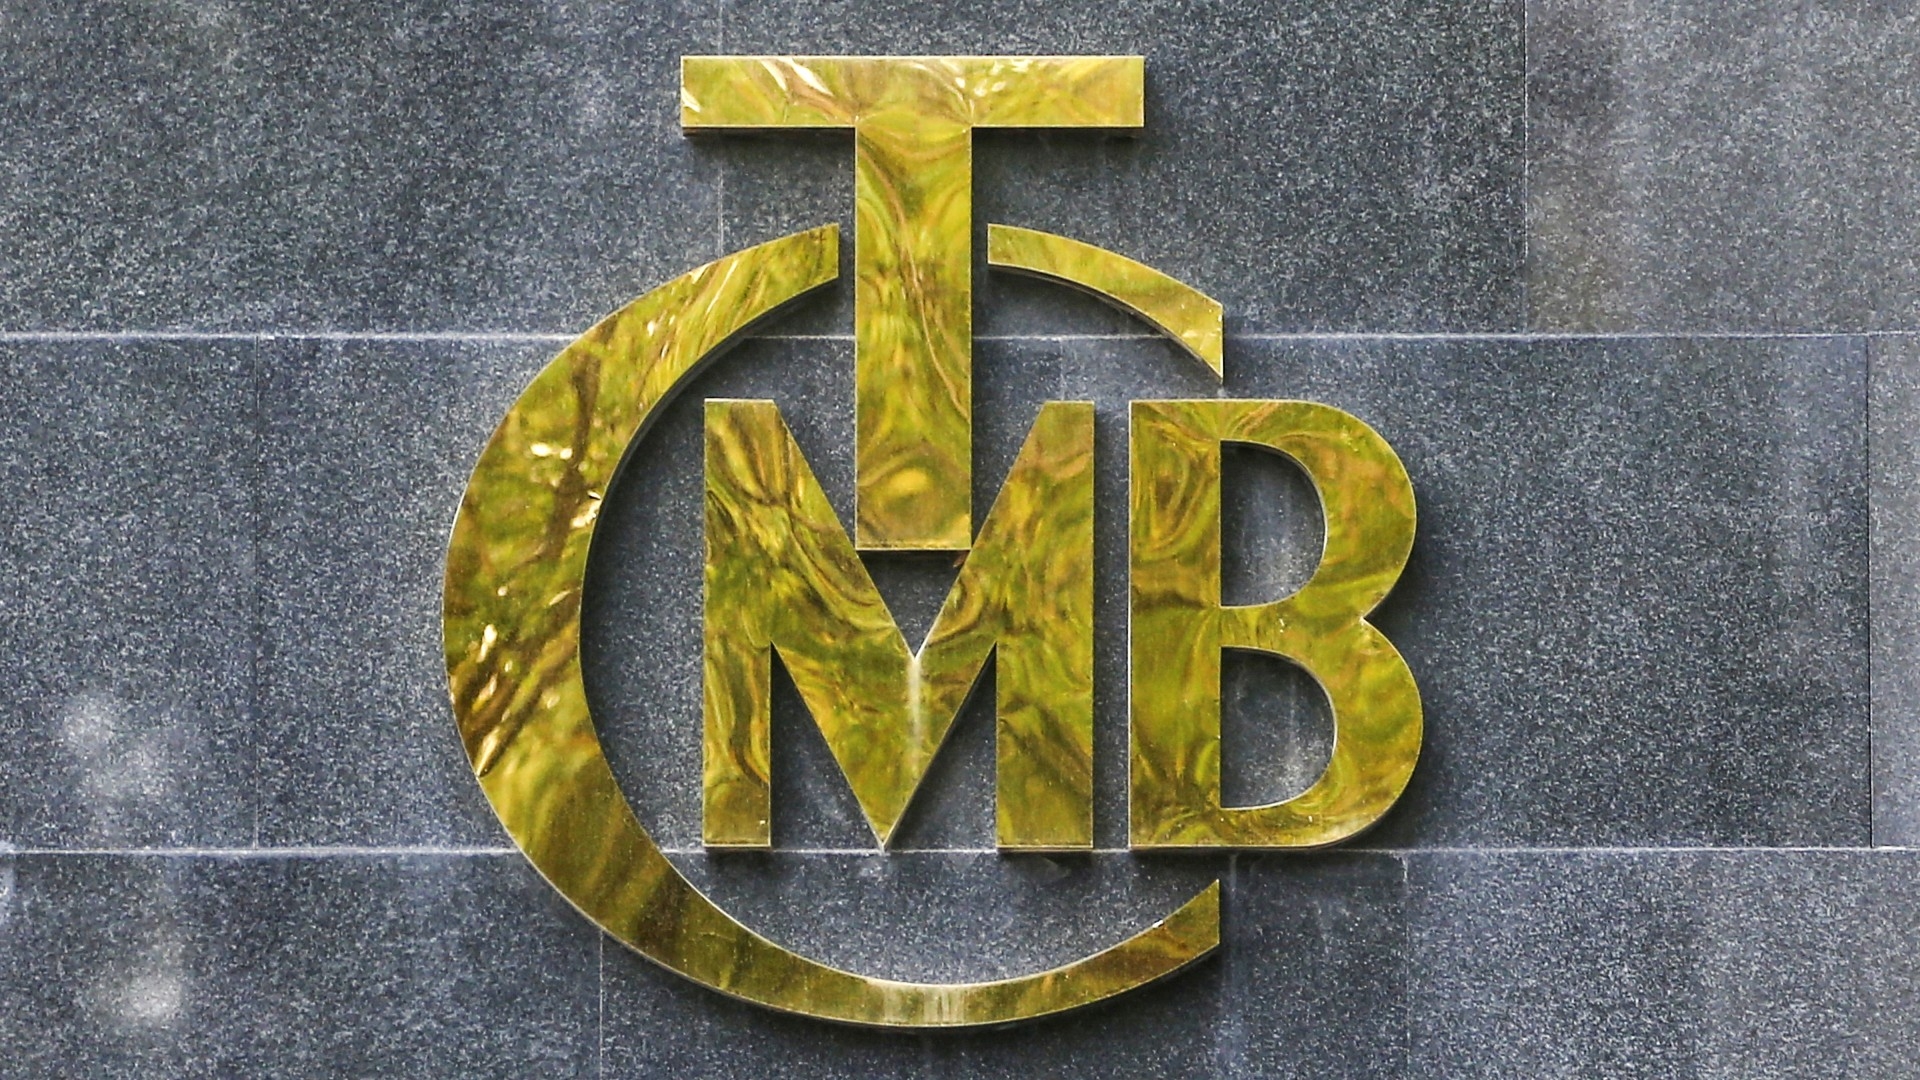 A logo of Turkey's Central Bank is pictured at the entrance of its headquarters in Ankara (Reuters)